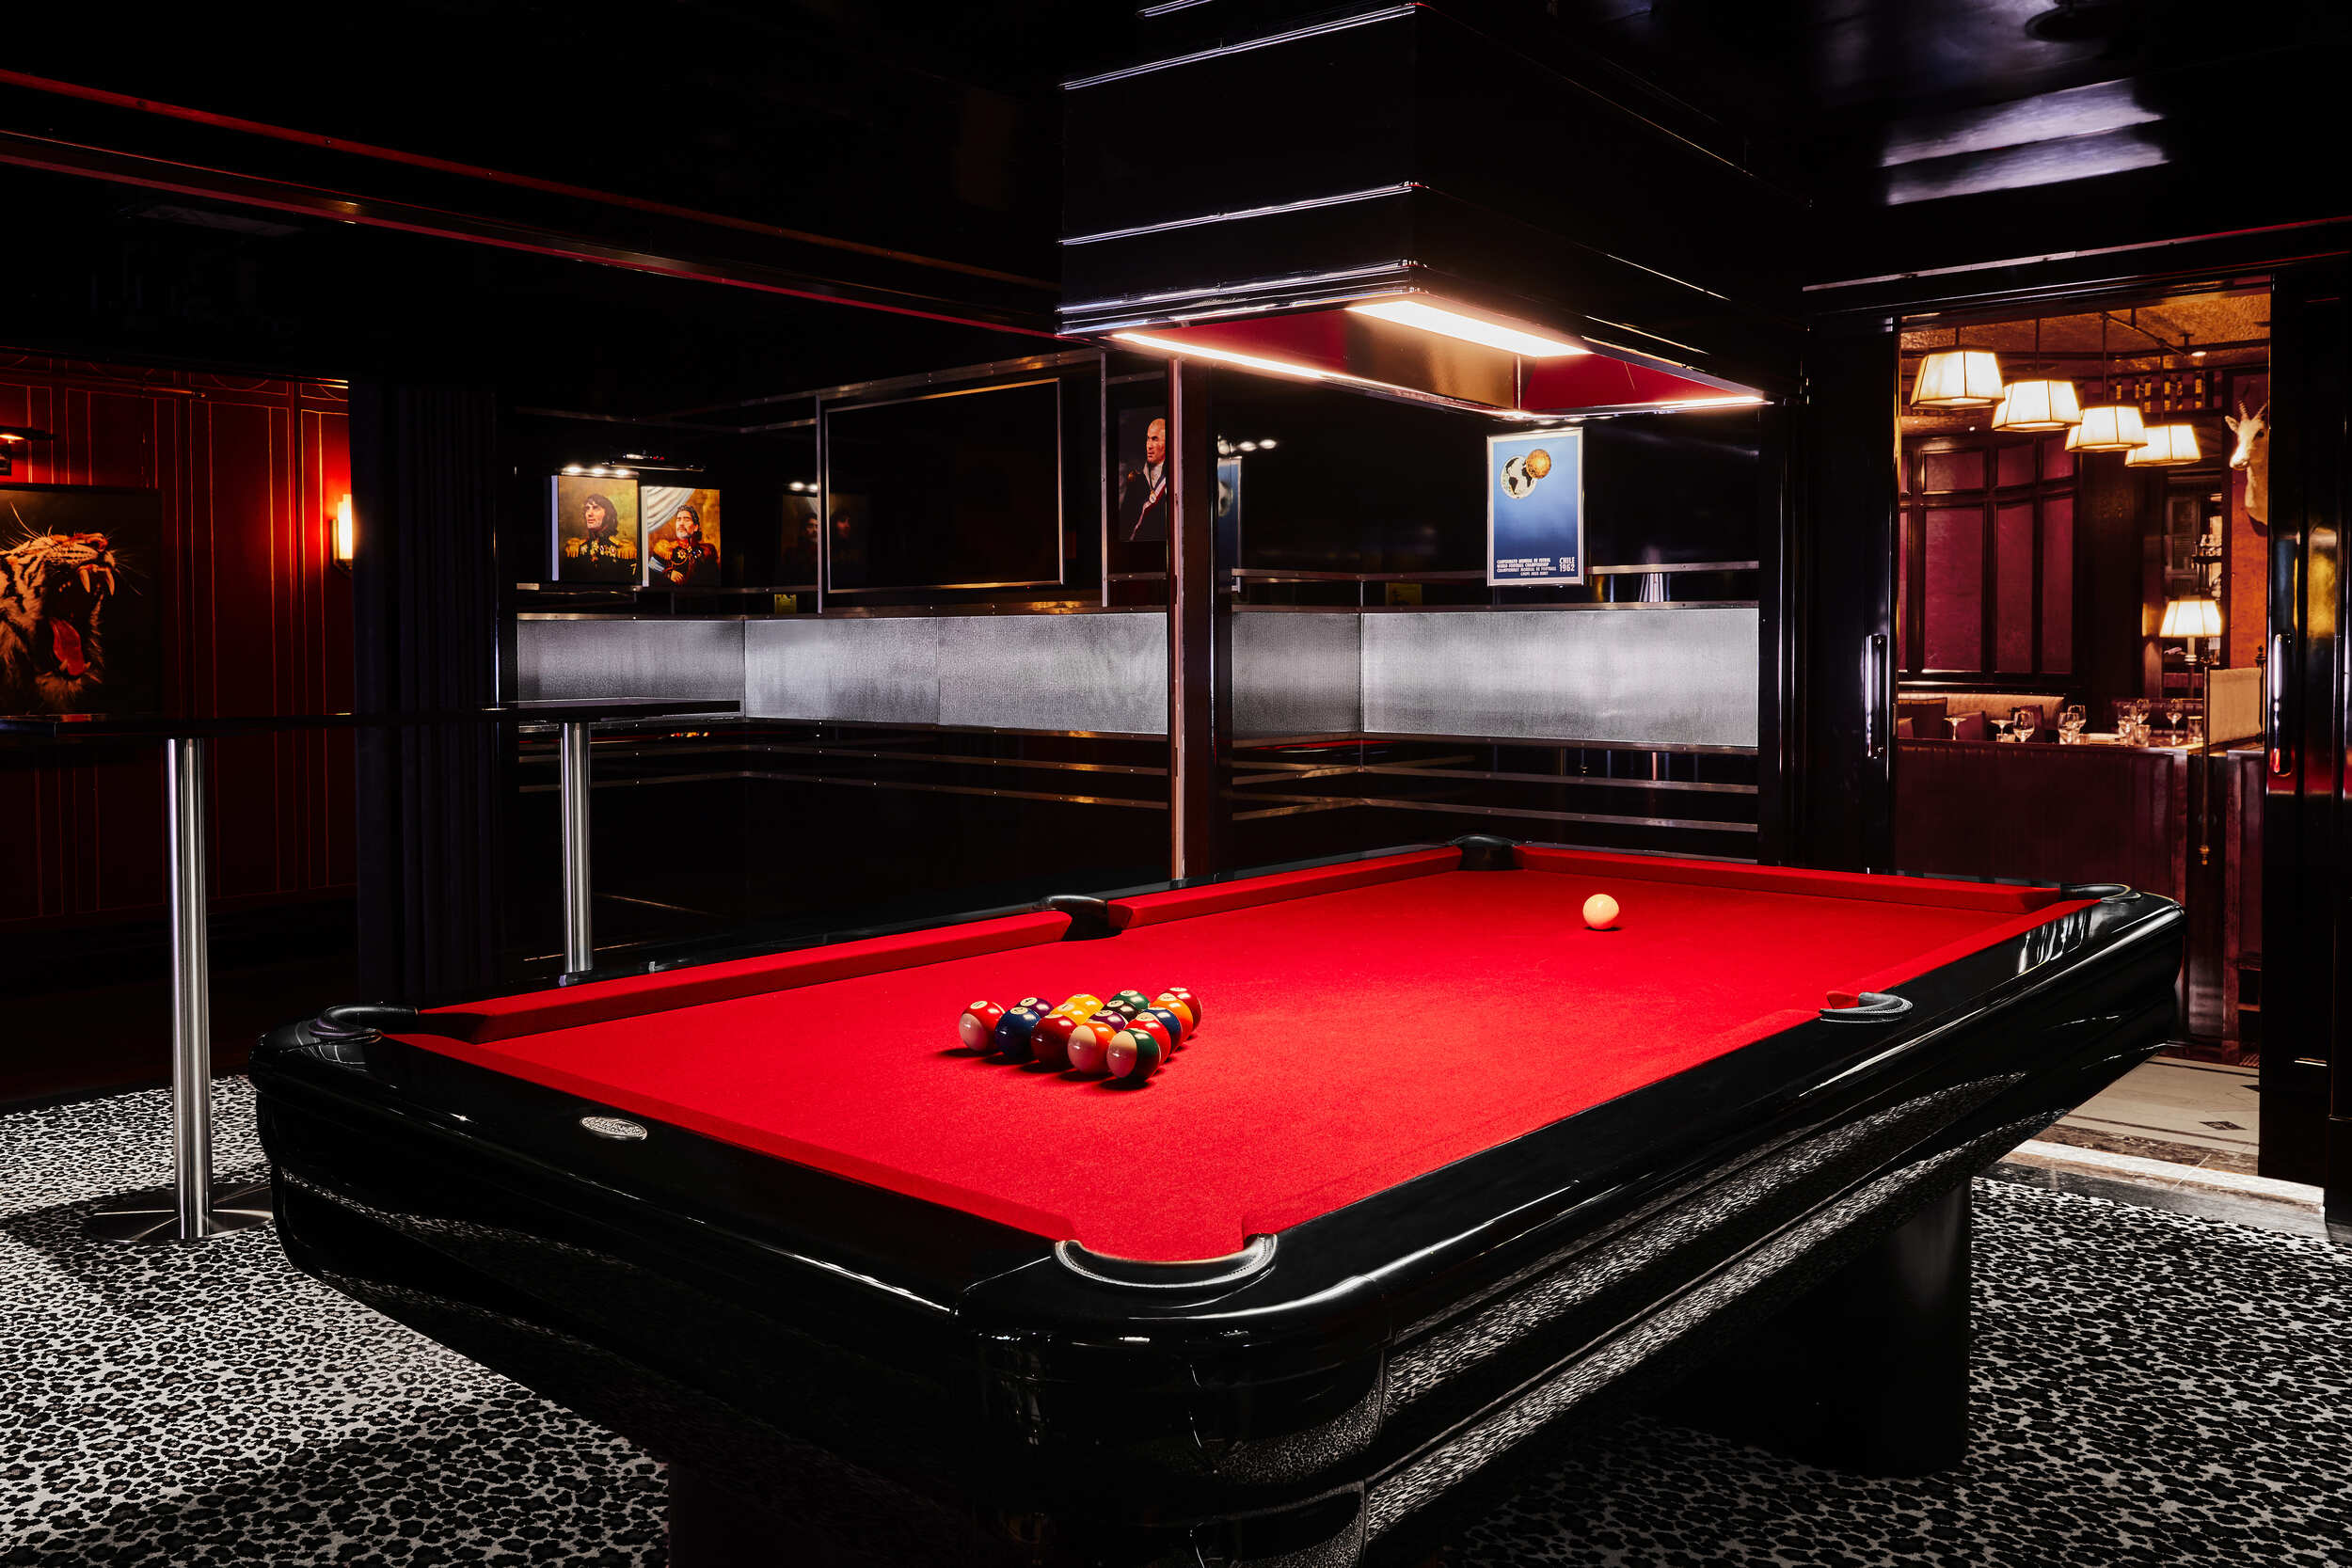 Luxurious pool table with ambient lighting, set up for play